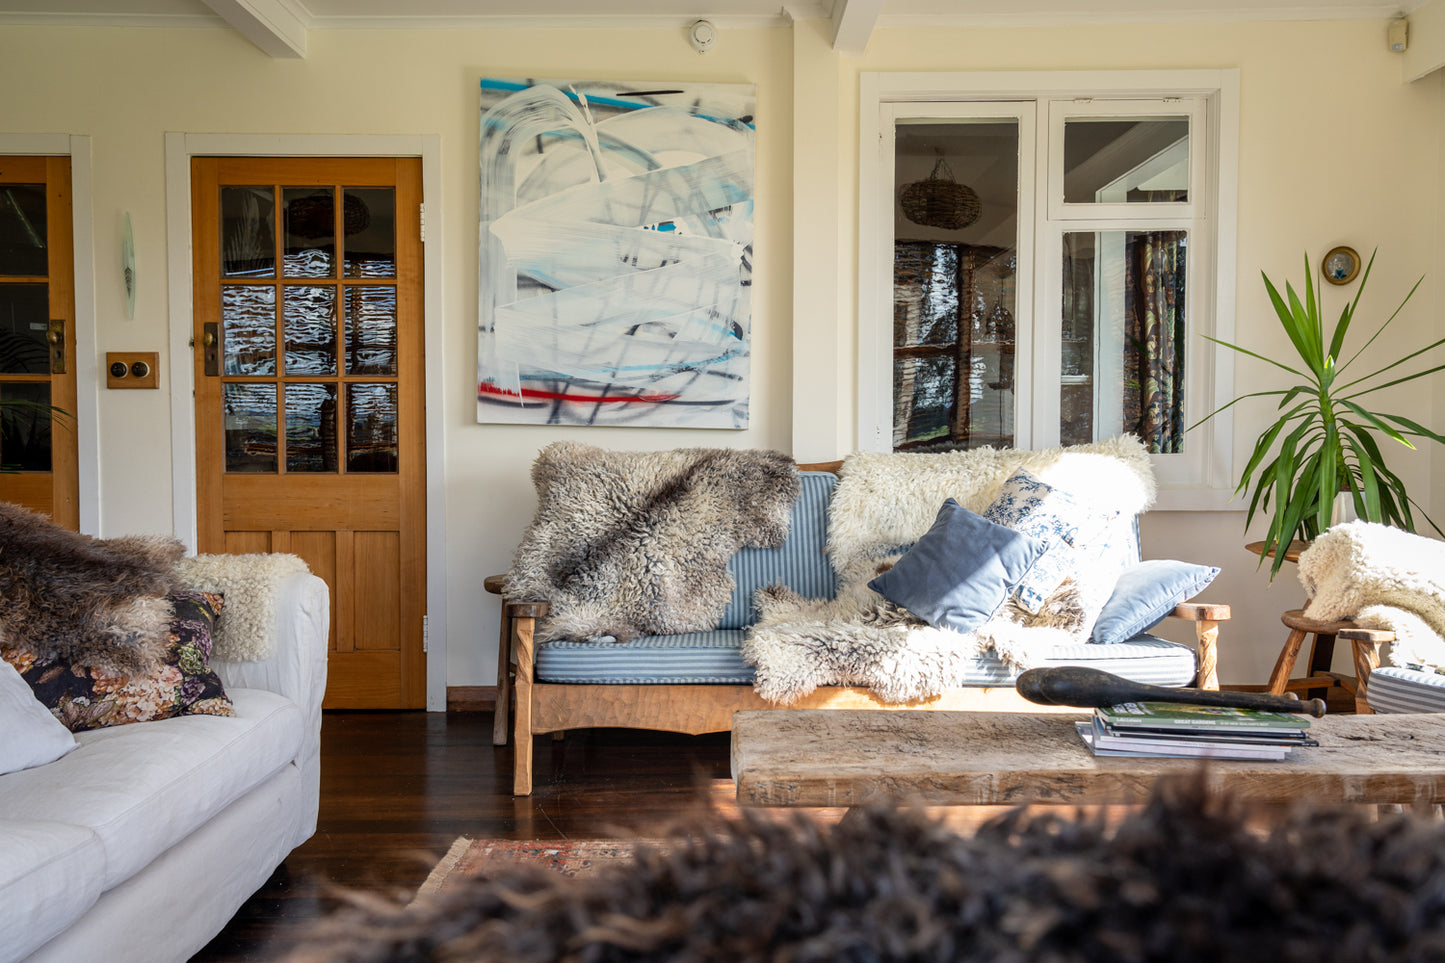 How to use Three Sticks Gotland sheepskin in your home